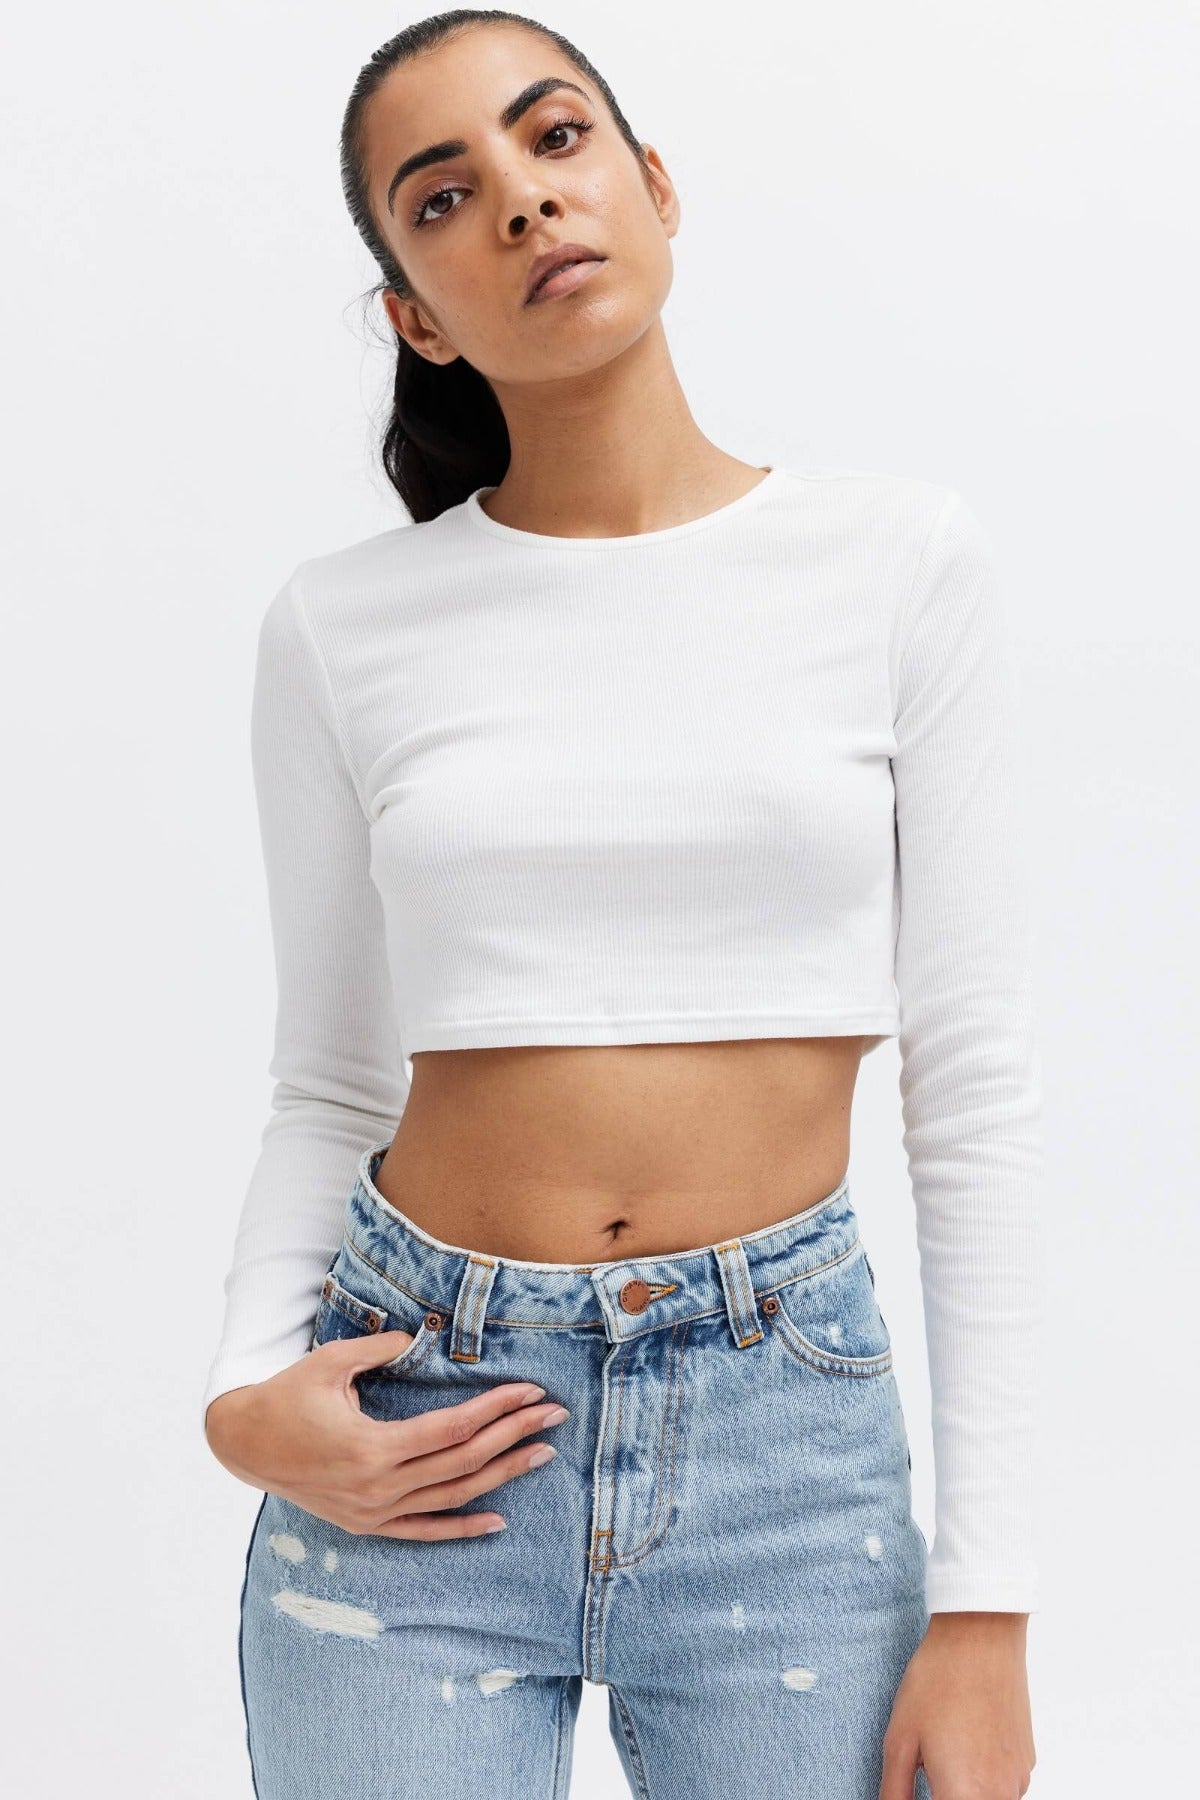 high rise, comfy style cropped jeans 